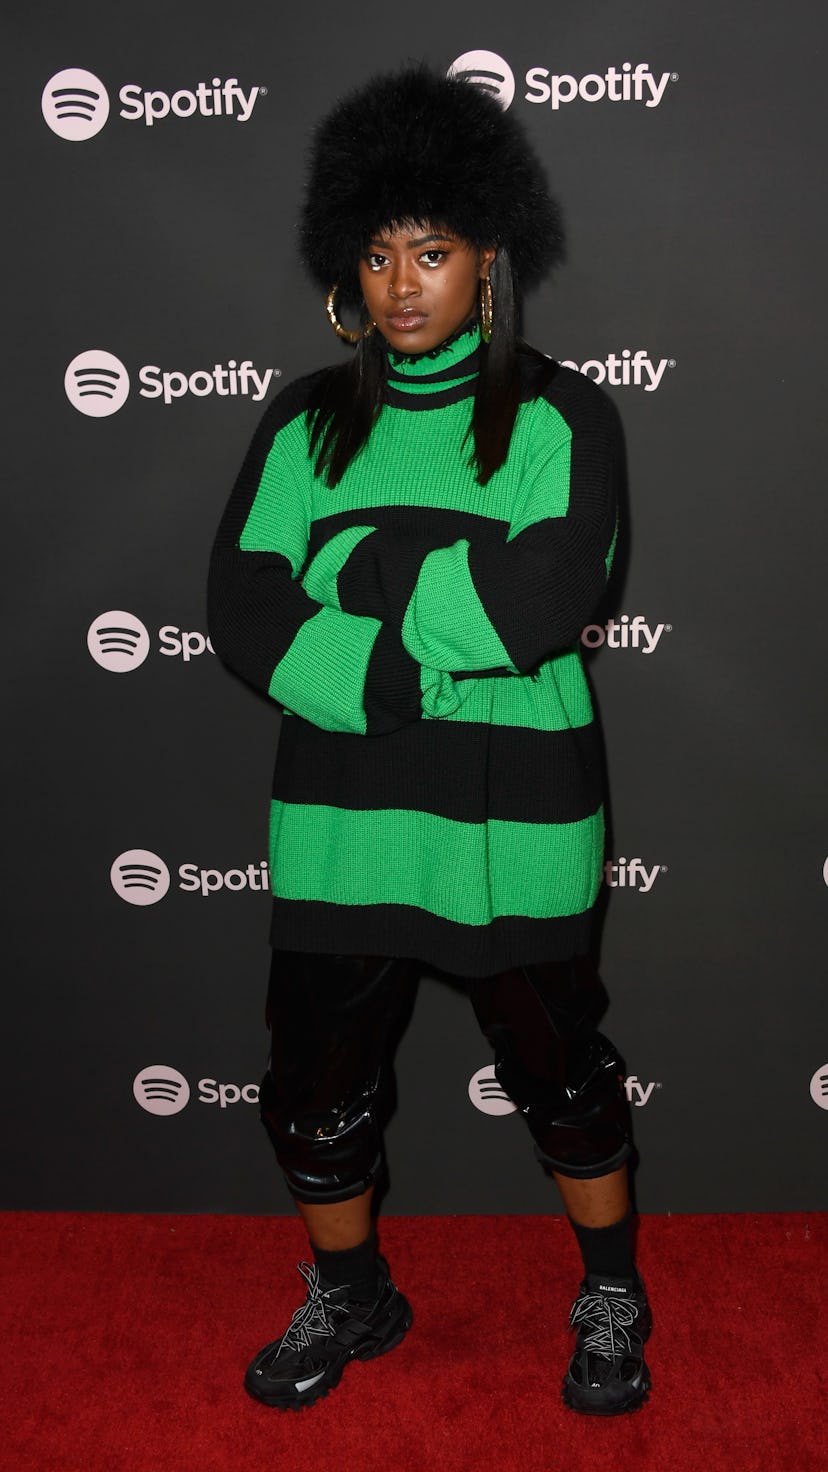 LOS ANGELES, CA - FEBRUARY 07:  Tierra Whack attends Spotify "Best New Artist 2019" event at Hammer ...